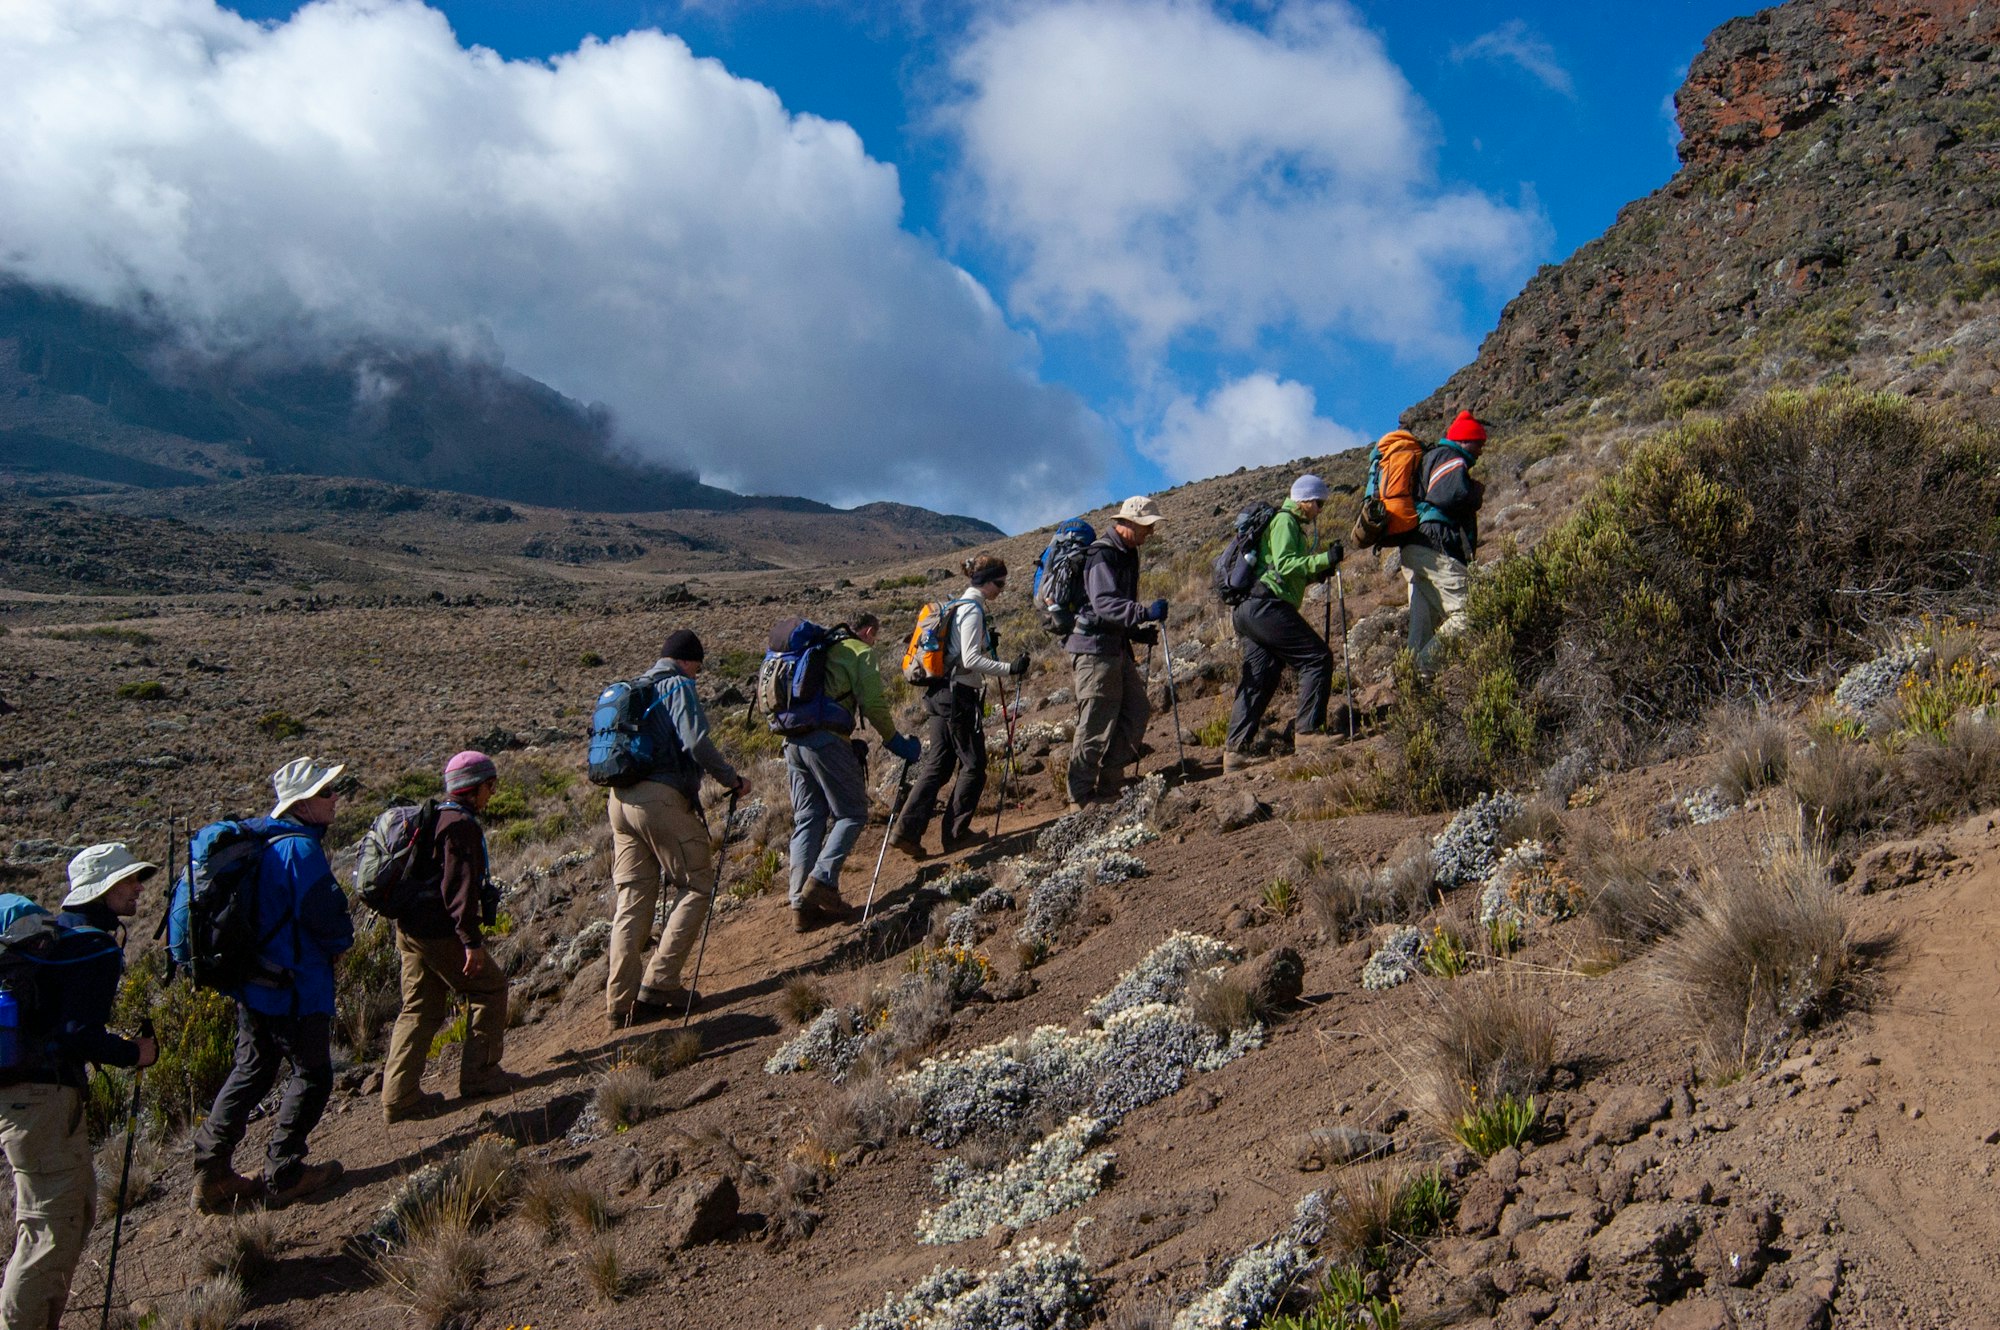 Line of hikers walking uphill in the mountains, moss, heather and small bushes on red coloured sand. This is the Route Rongai climbing Kilimanjaro.